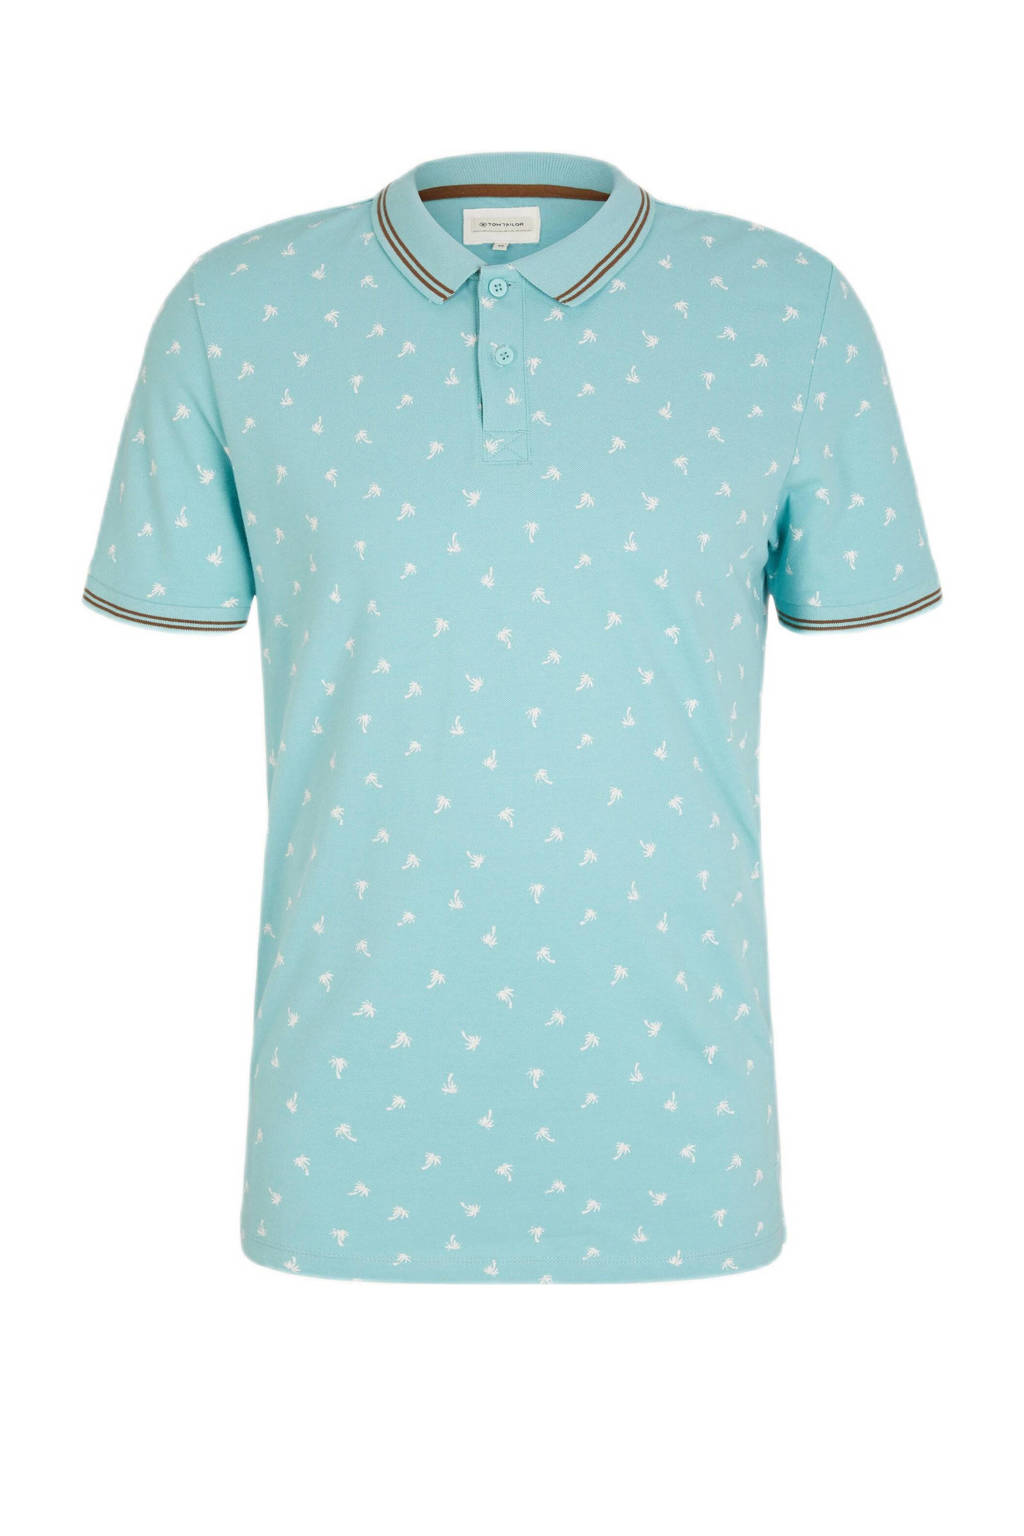 Tom Tailor polo met all over print mint haze